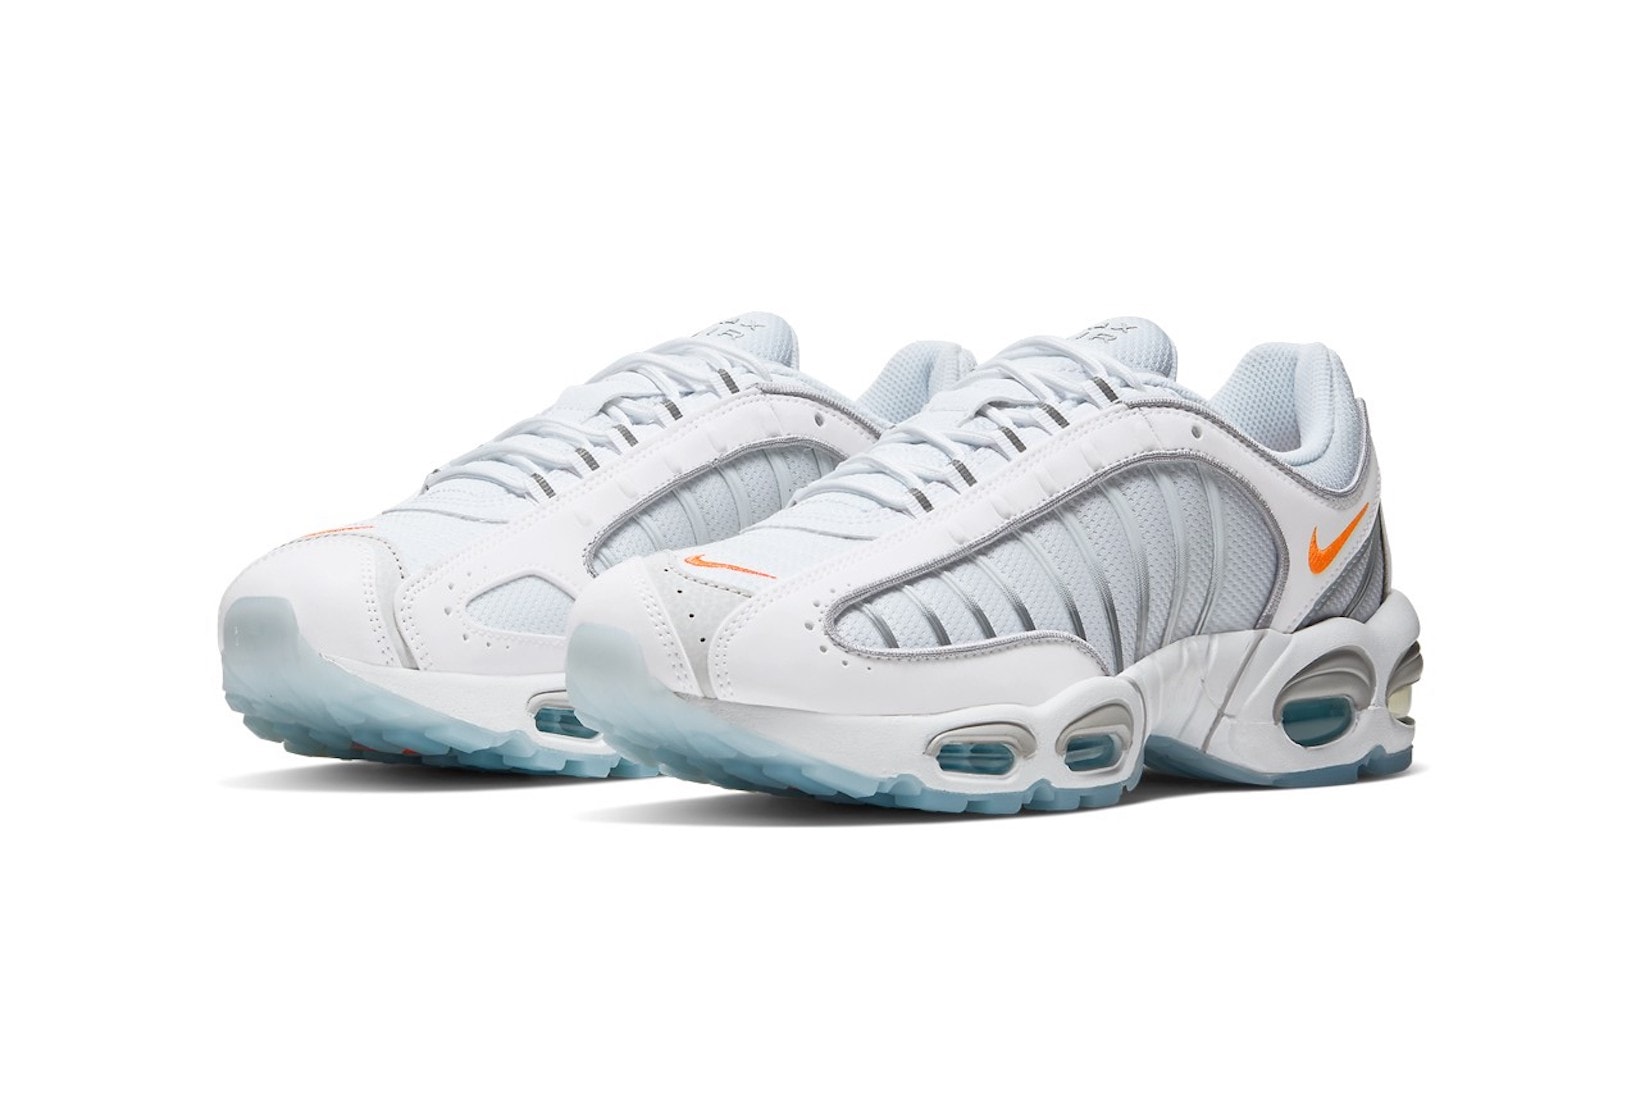 nike air max tailwind iv sneakers platinum tint white silver orange colorway footwear shoes kicks sneakerhead lateral laces